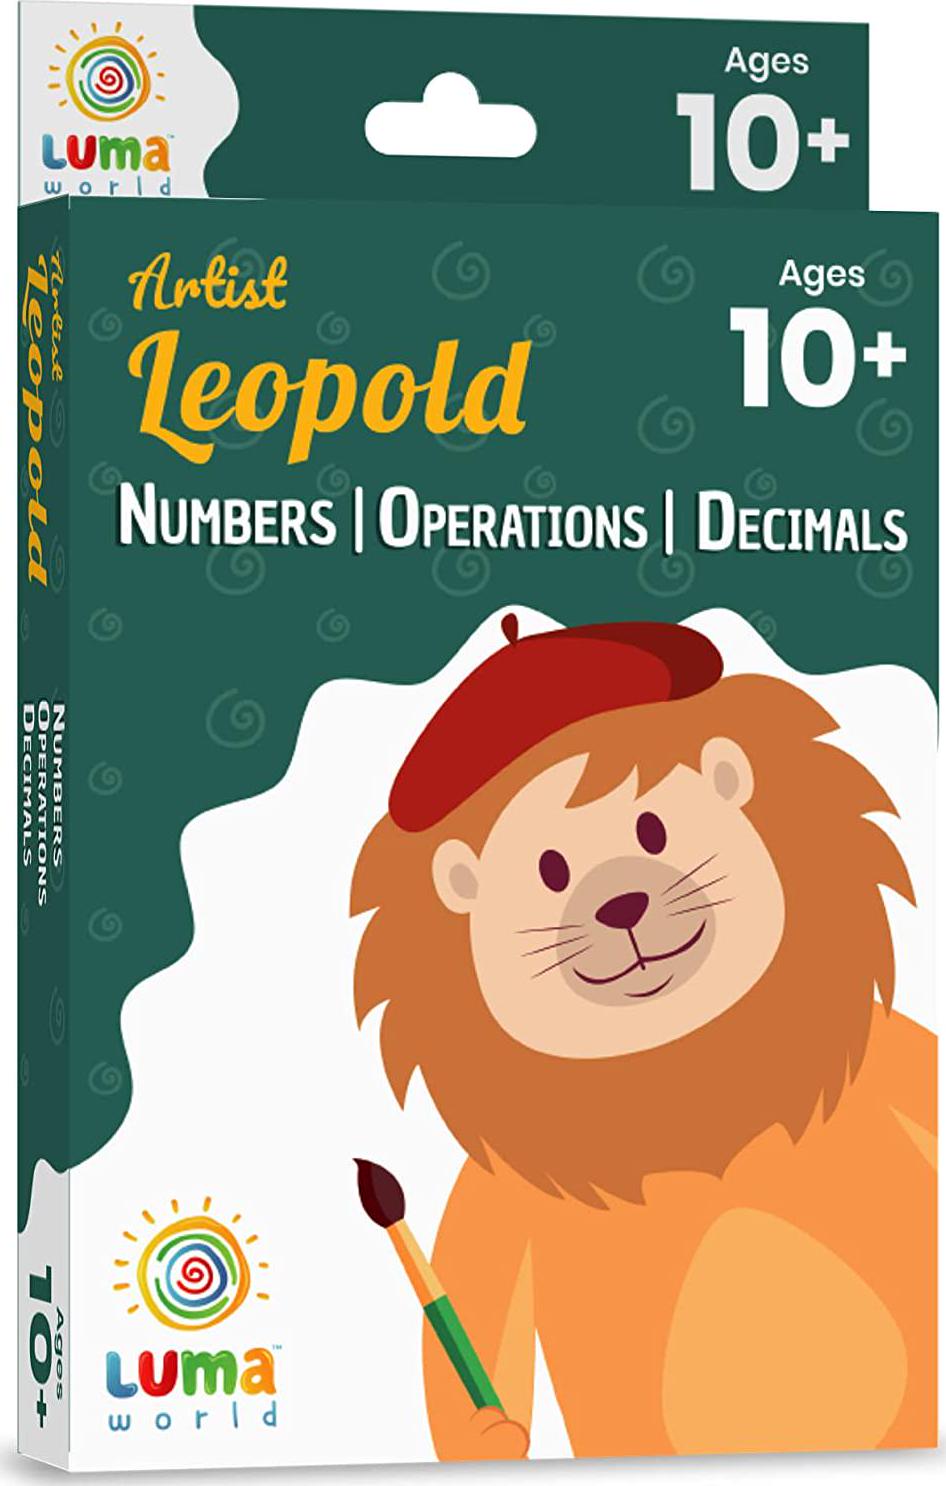 LUMA WORLD ADD LIFE TO LEARNING, Luma World Educational Flash Cards for Ages 10 yr+: Artist Leopold | Game-based Maths Flash Cards with Magic Glass to view Hidden Answers | Learn Grade 5 Numbers, Decimals and Integers (Set of 50 Cards)